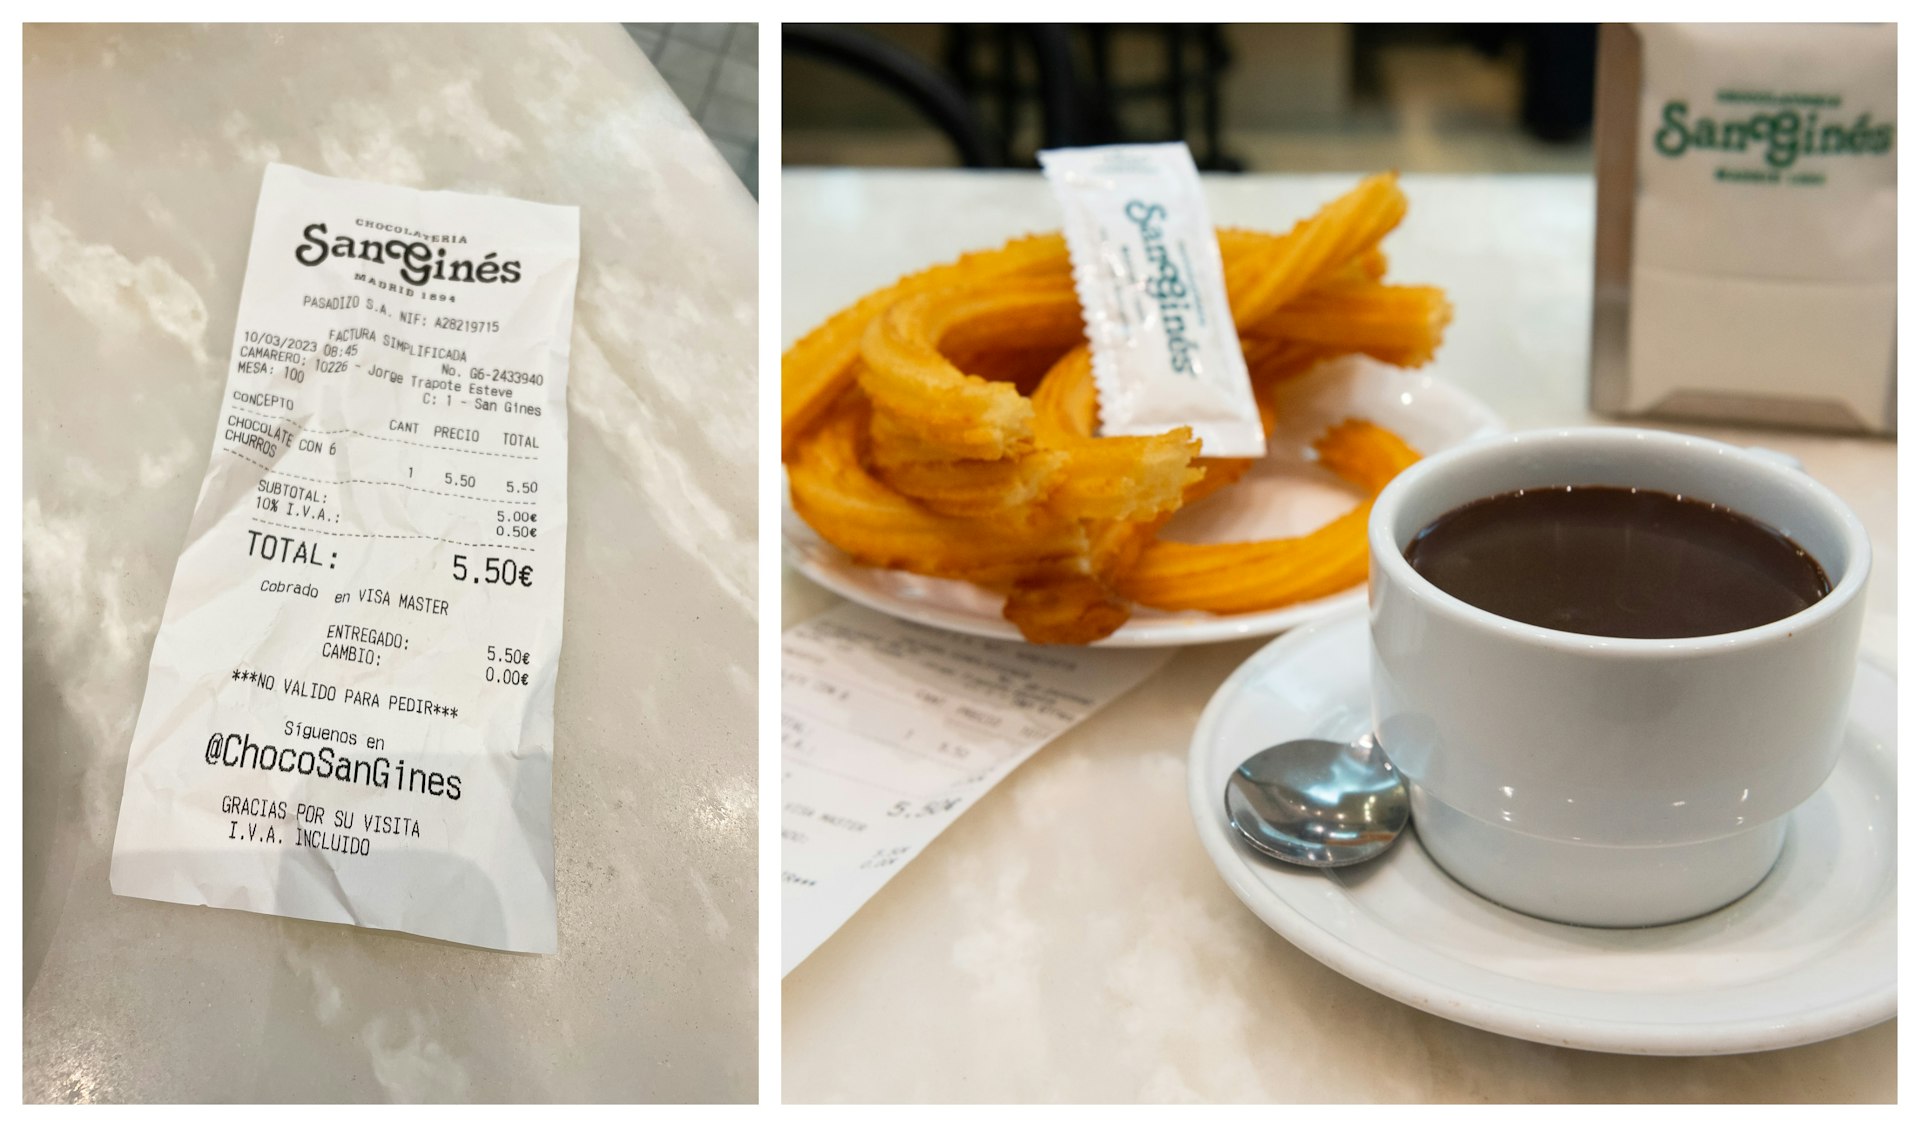 Hot chocolate and churros in San Gines Madrid